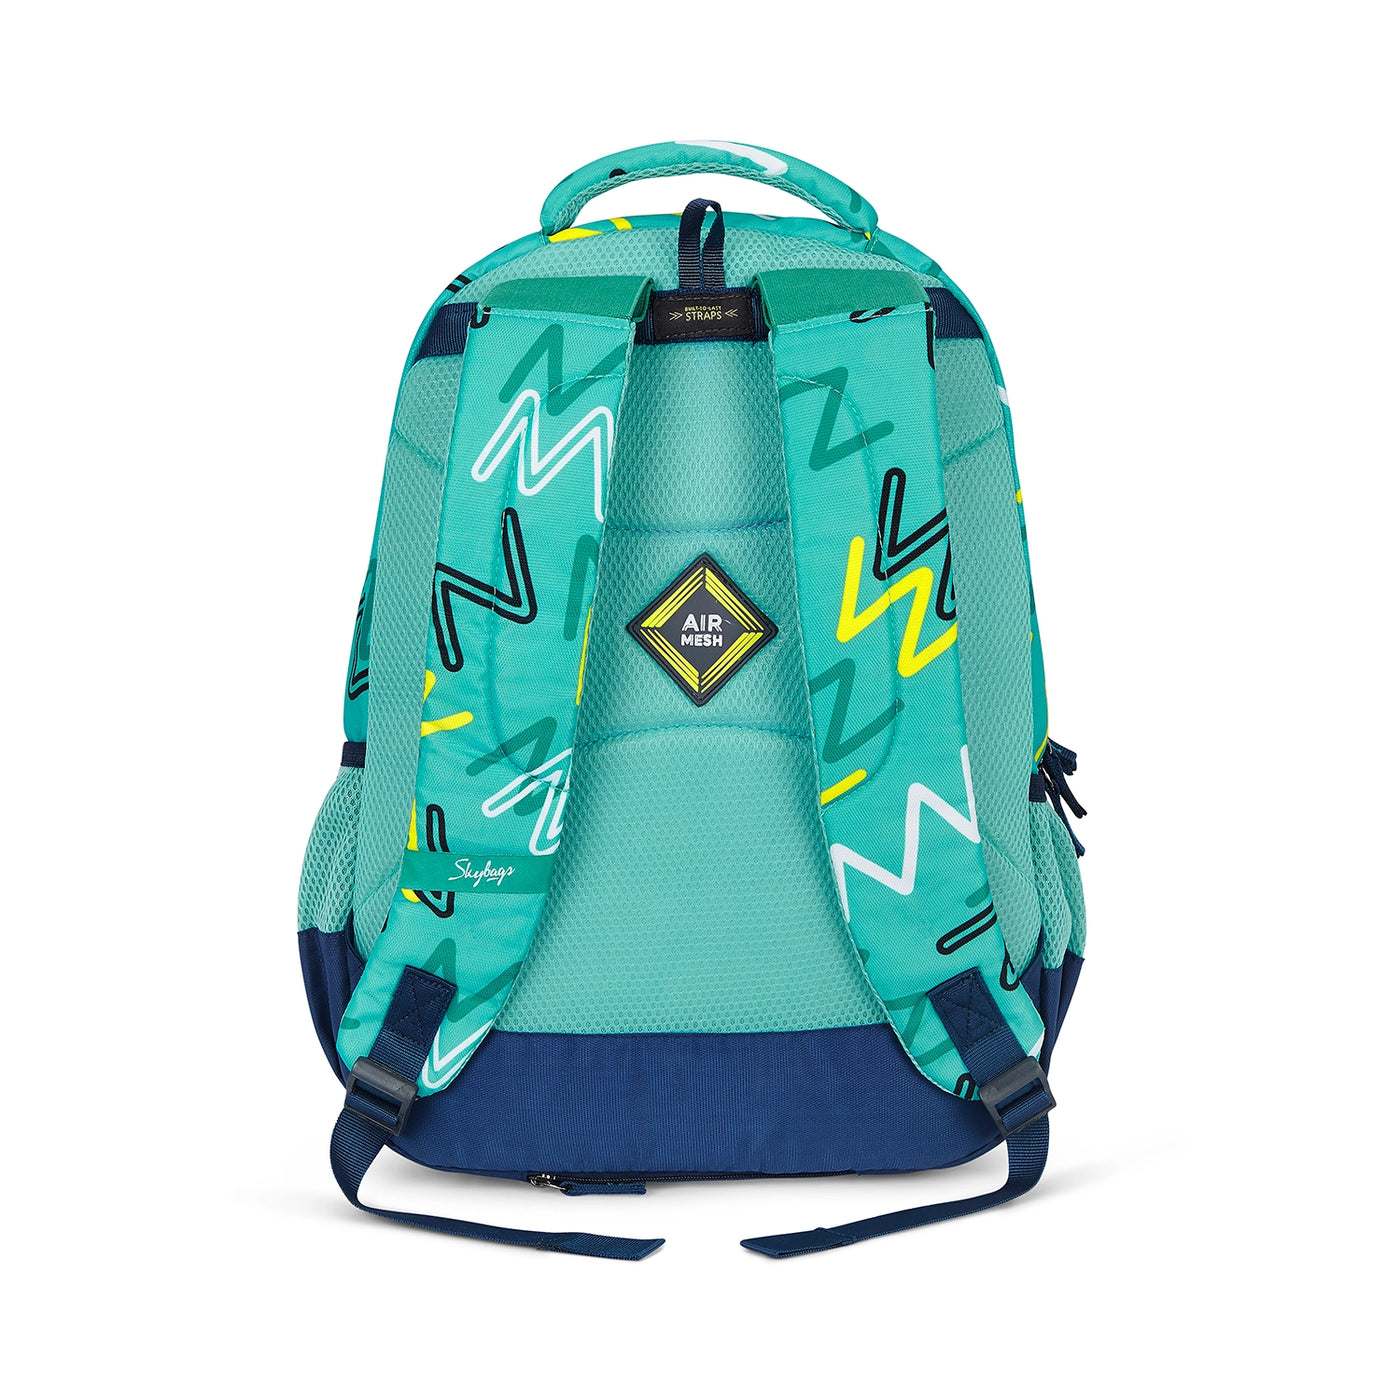 Skybags Drip Pro "04 Backpack Light Blue"